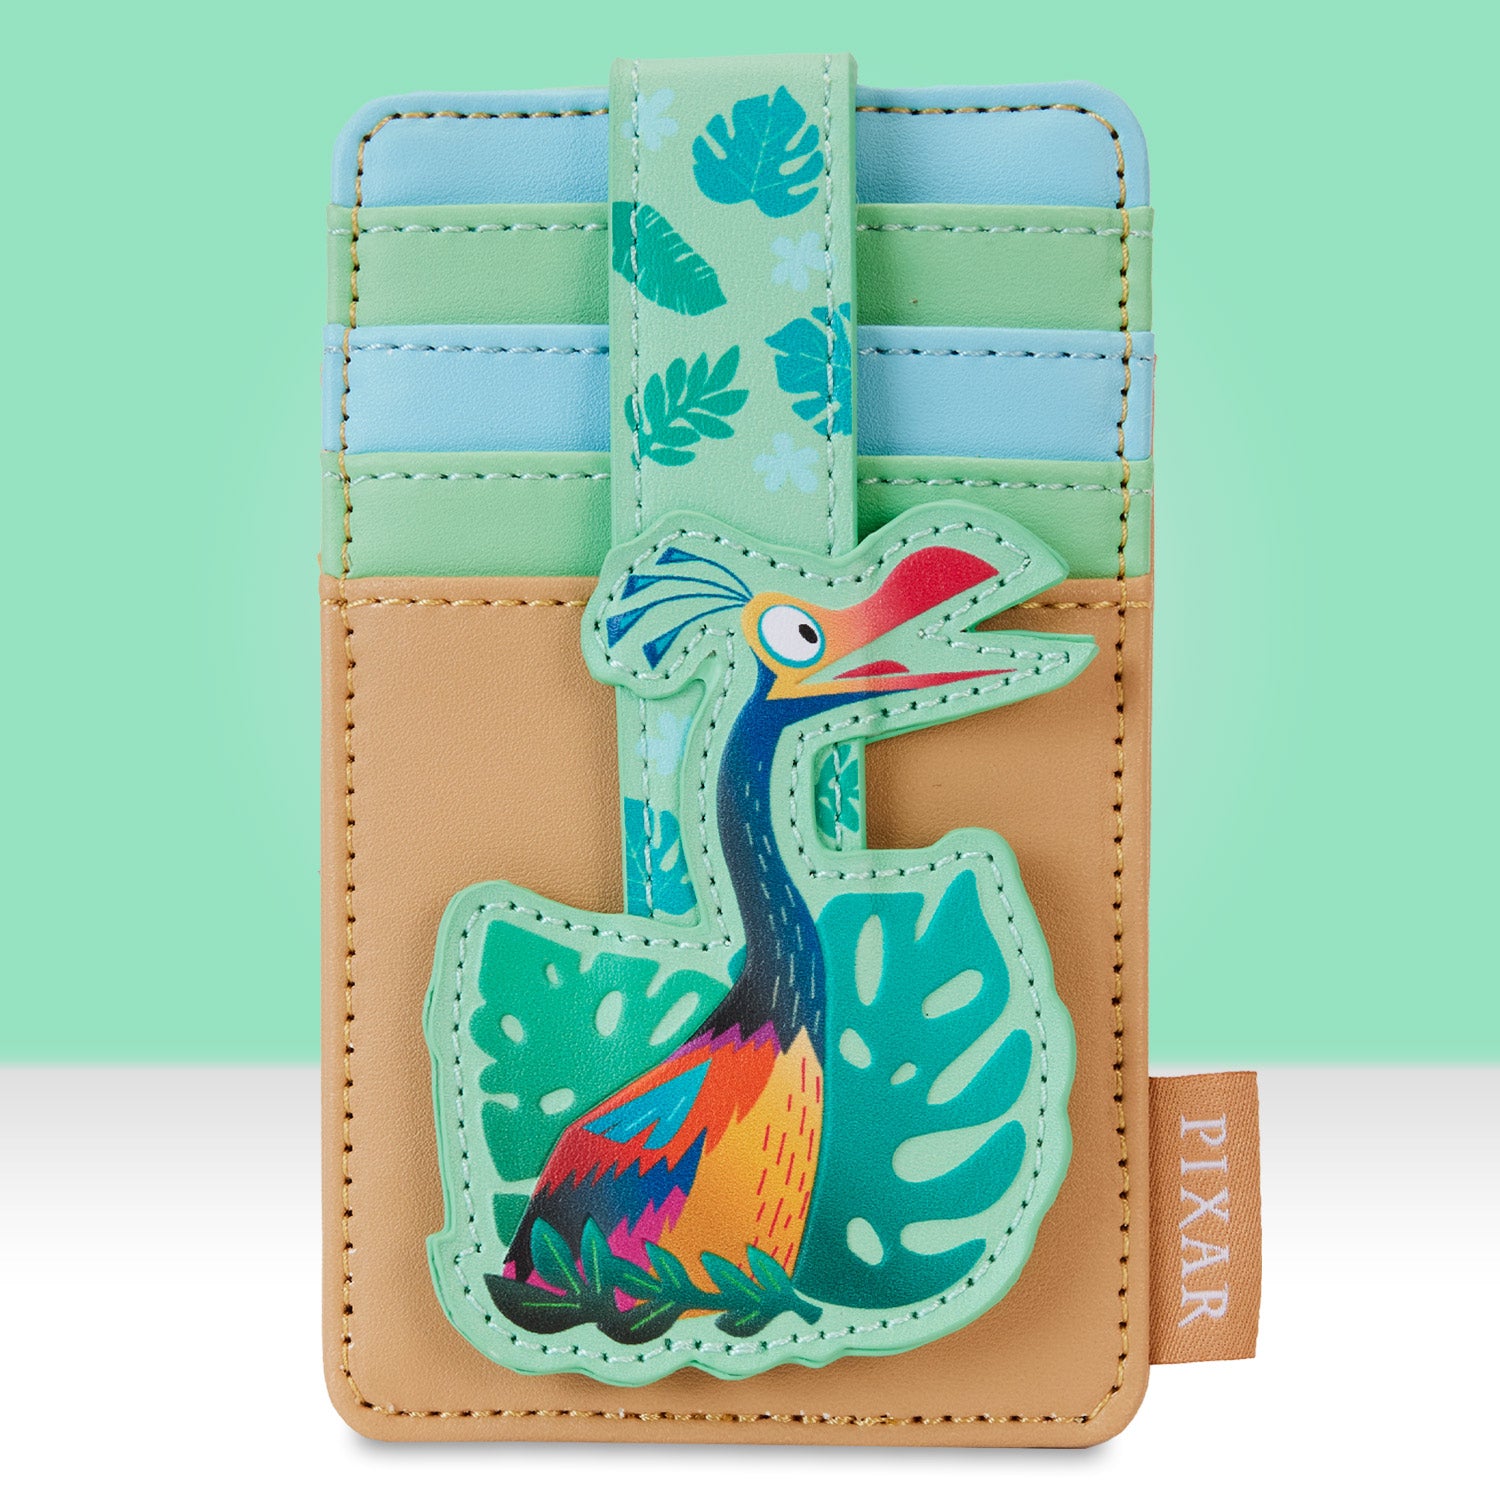 Loungefly x Disney Pixar Up 15th Anniversary Kevin Card Holder